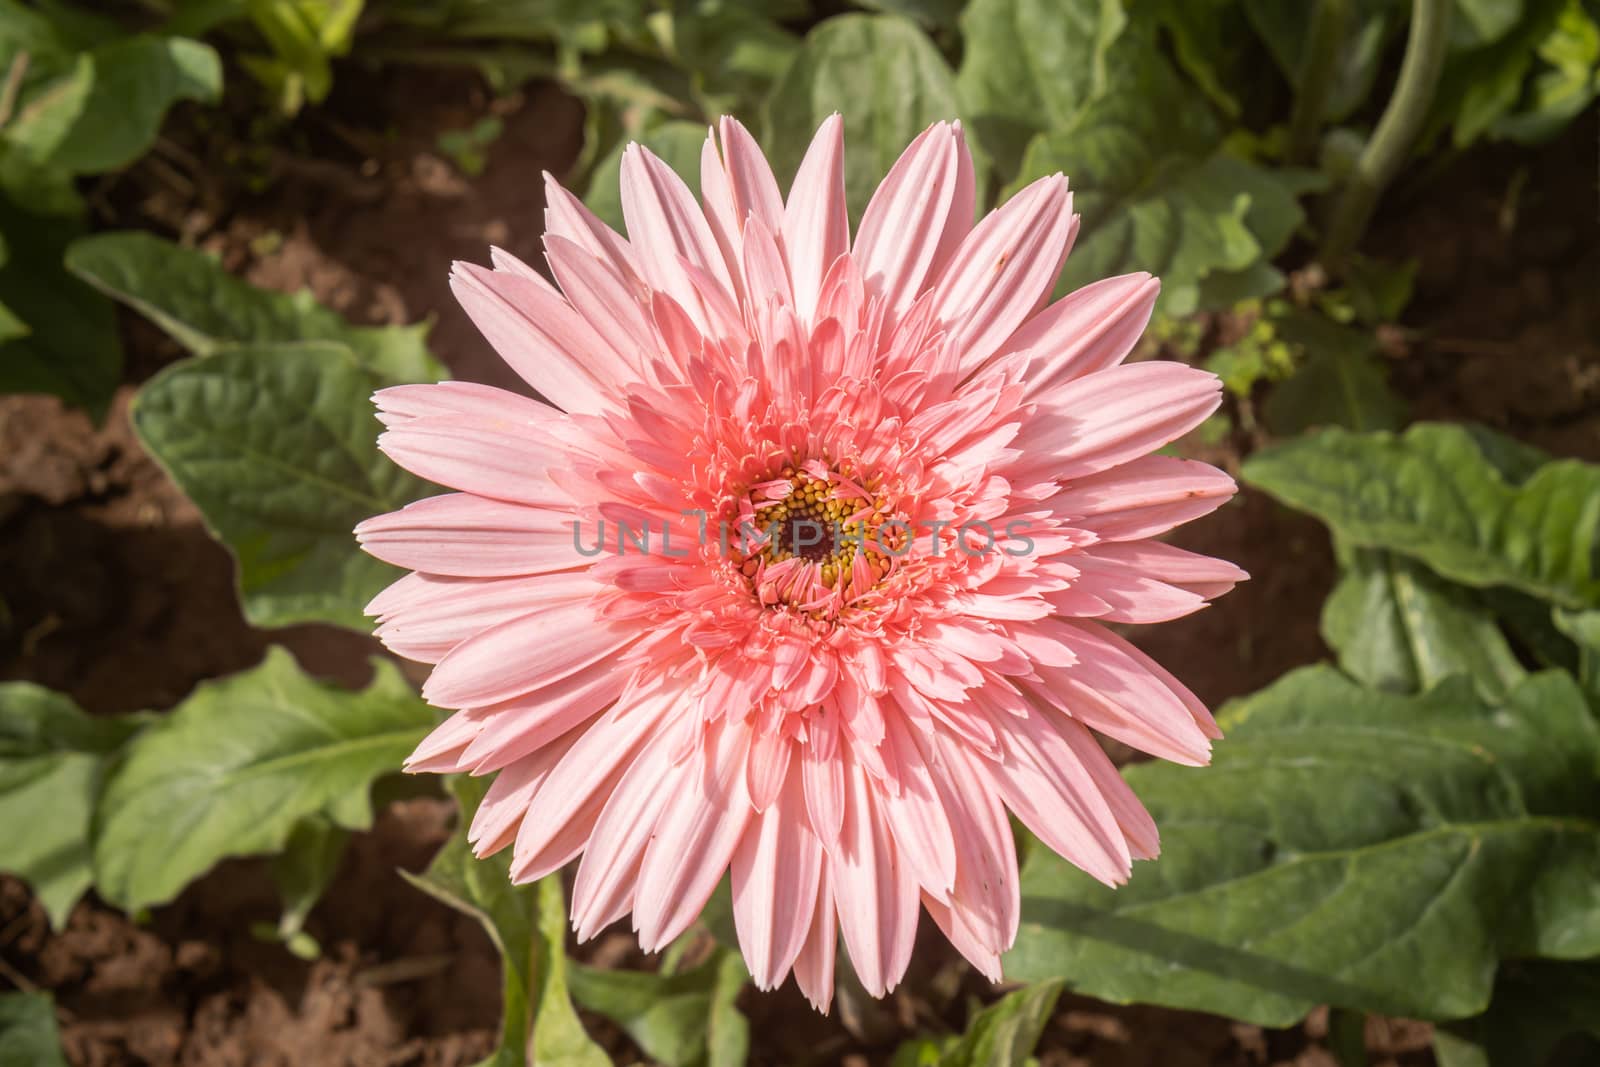 Pink Gerbera Daisy or Gerbera Flower in Garden with Natural Light on Green Leaves Background